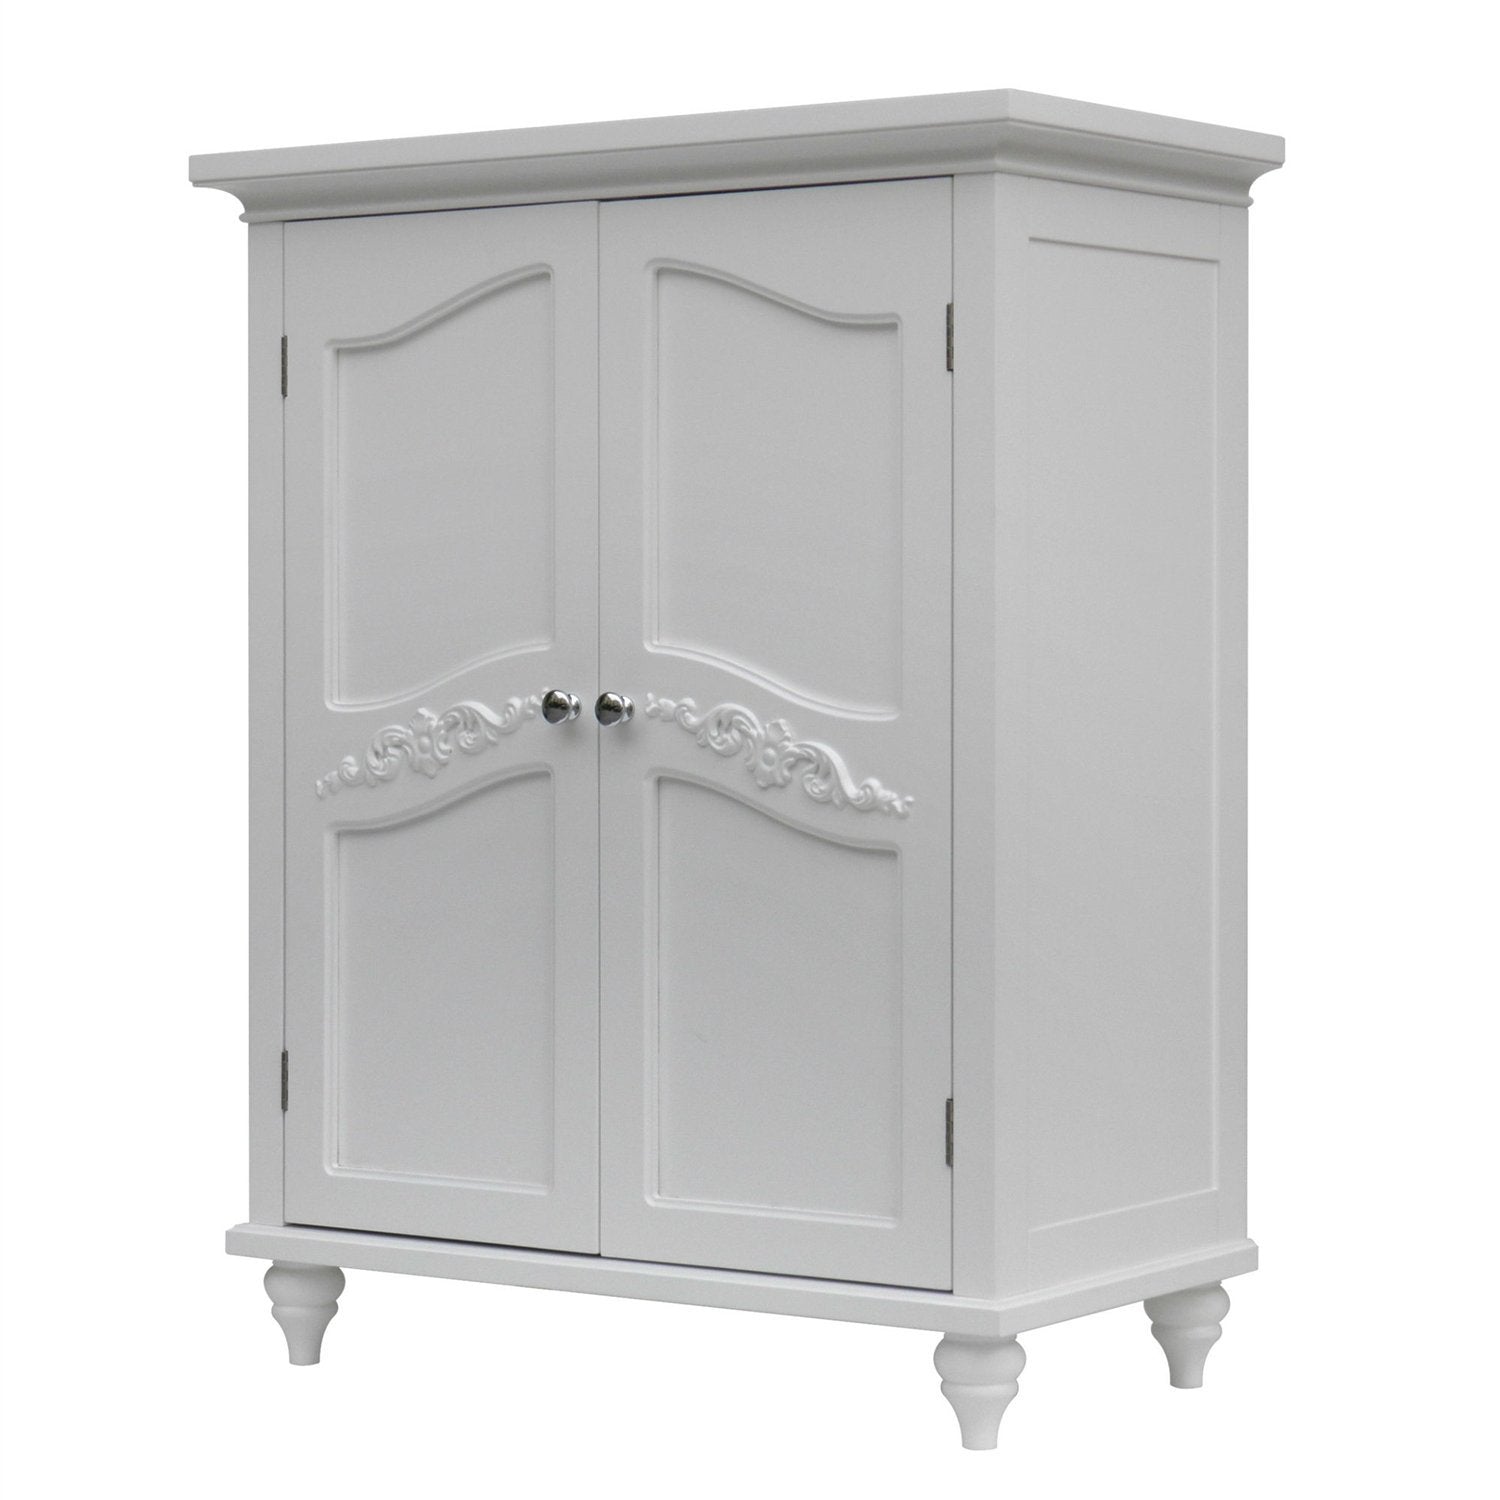 Bathroom Linen Storage Floor Cabinet with 2-Doors in Traditional White Wood Finish